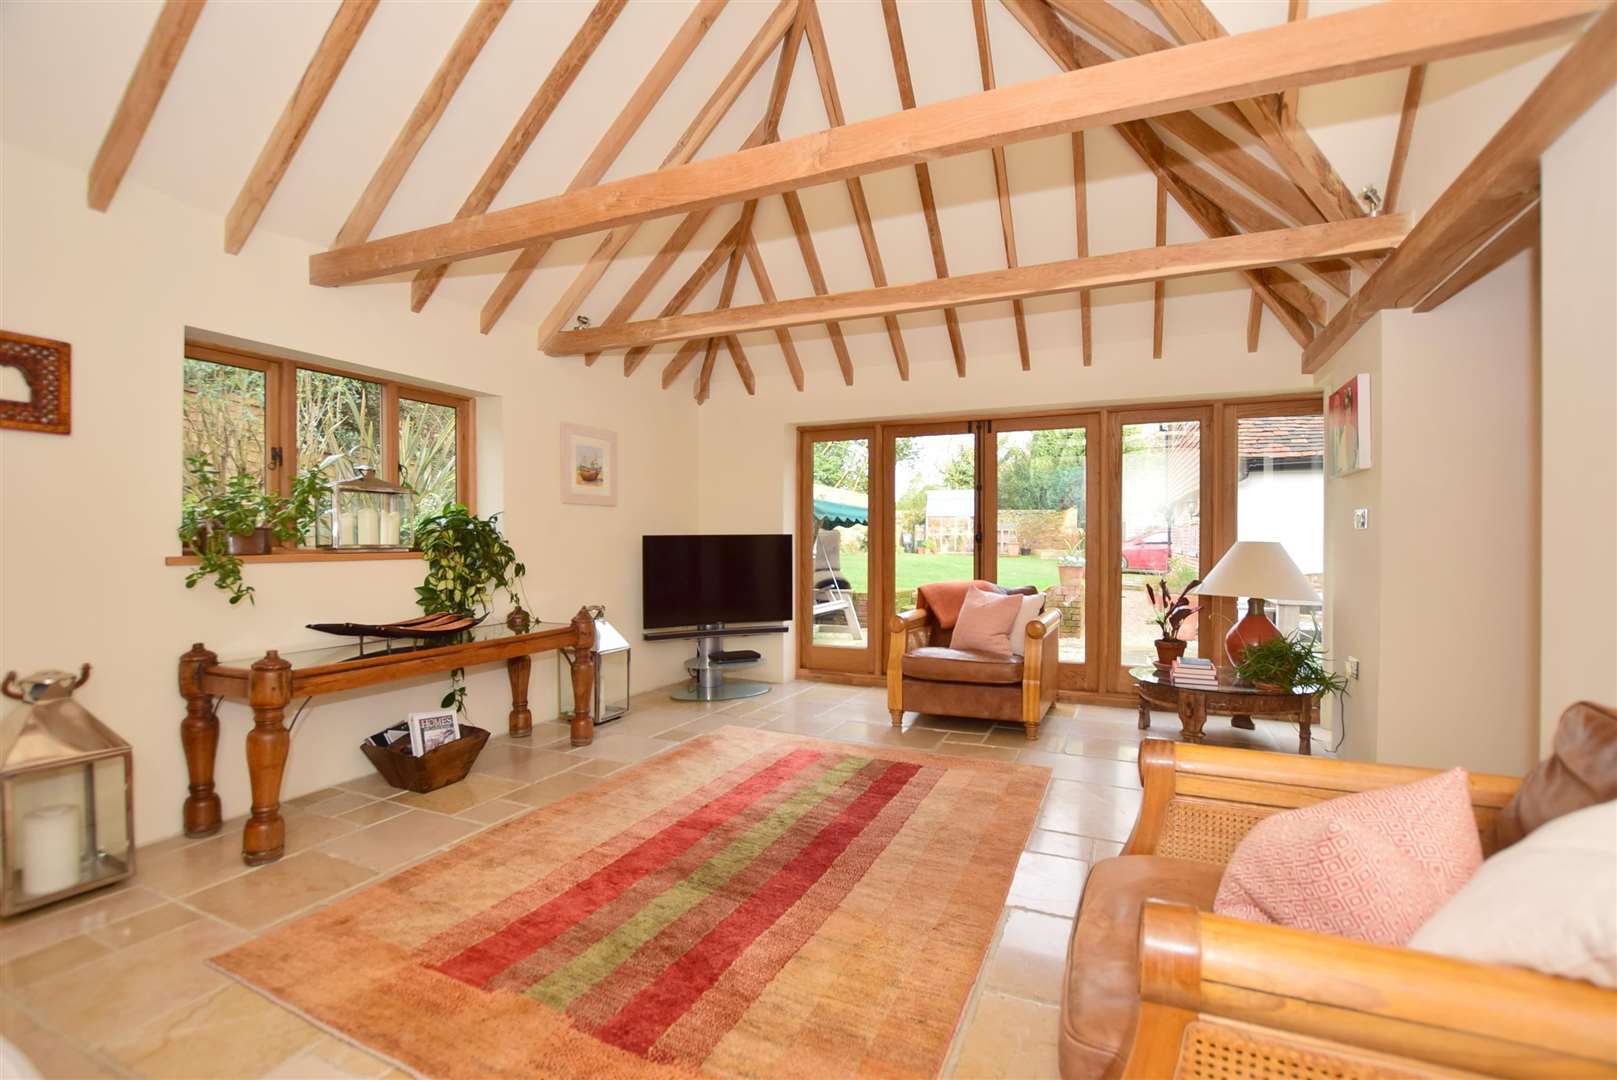 This detached period property in The Street, Hartlip has four generous sized reception rooms